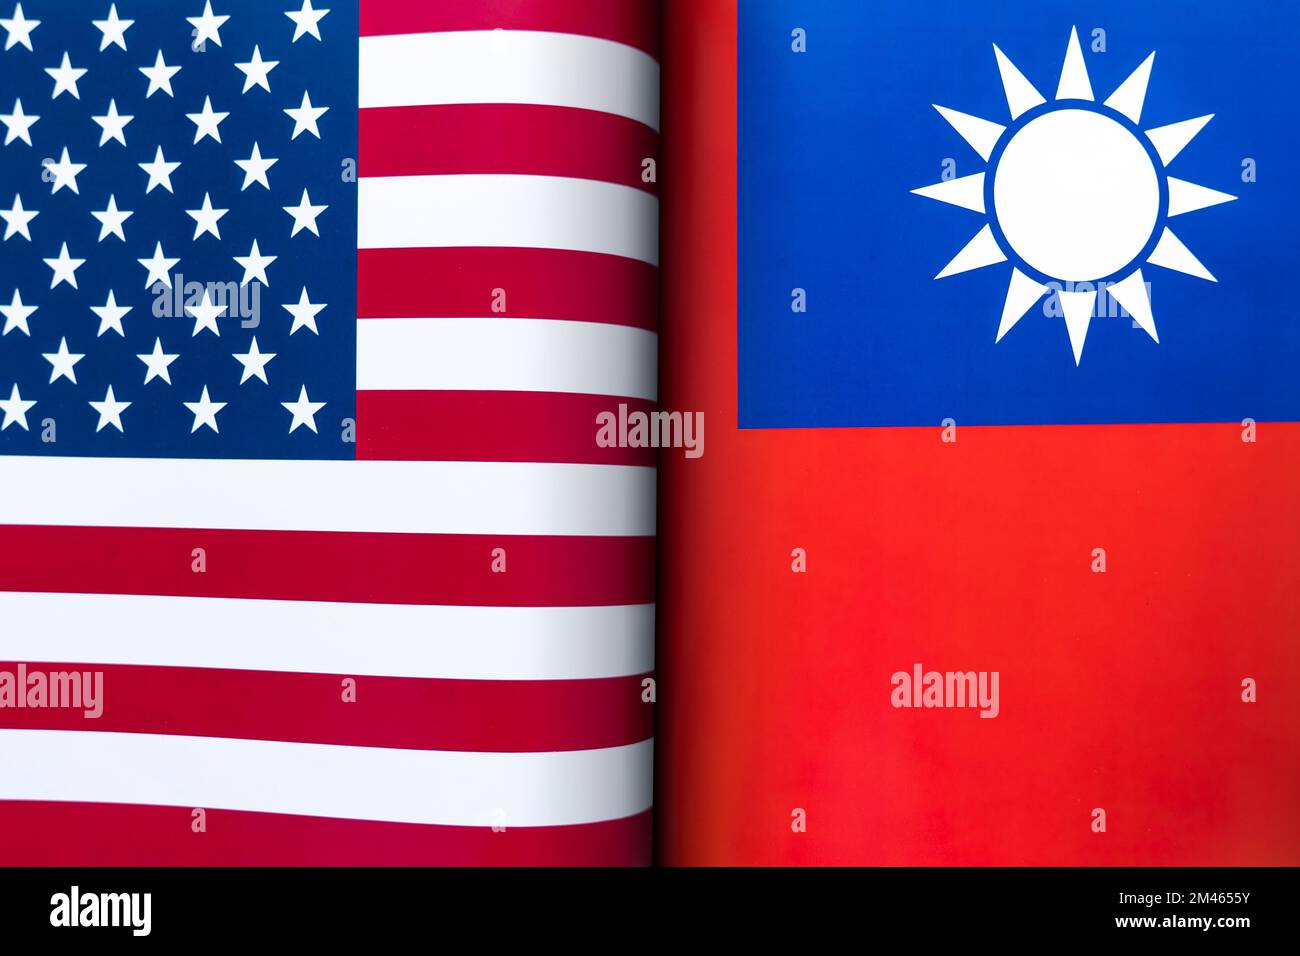 Background of the flags of the taiwan republic of china and USA. The concept of interaction or counteraction between the two countries. International Stock Photo